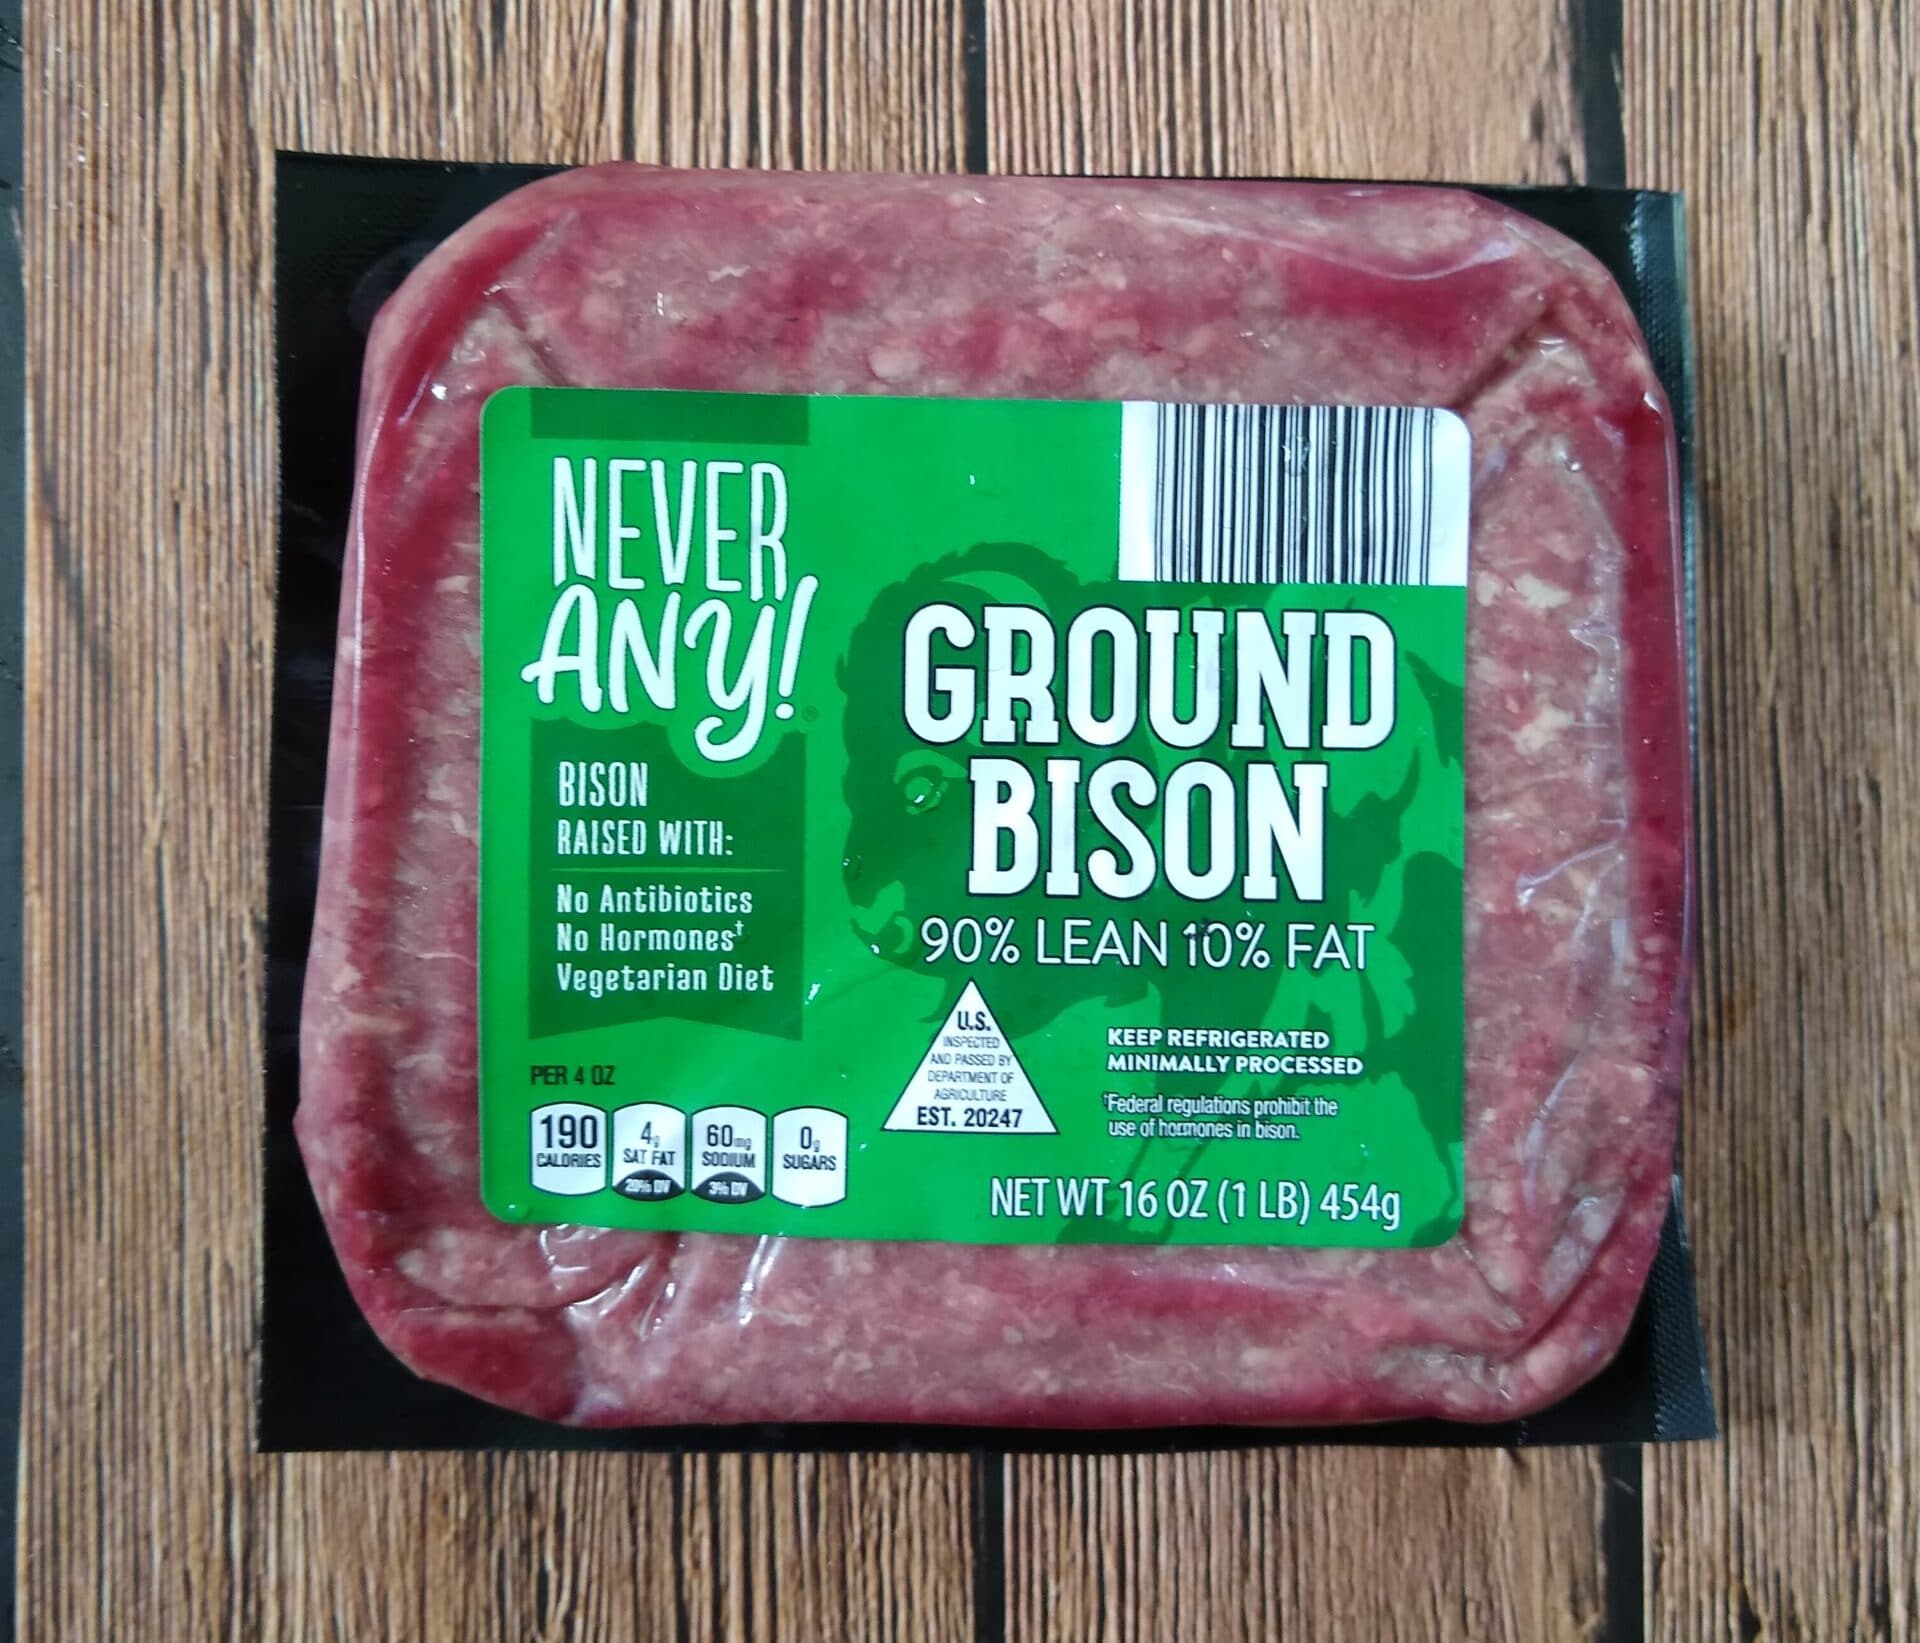 Never Any! Ground Bison | ALDI REVIEWER